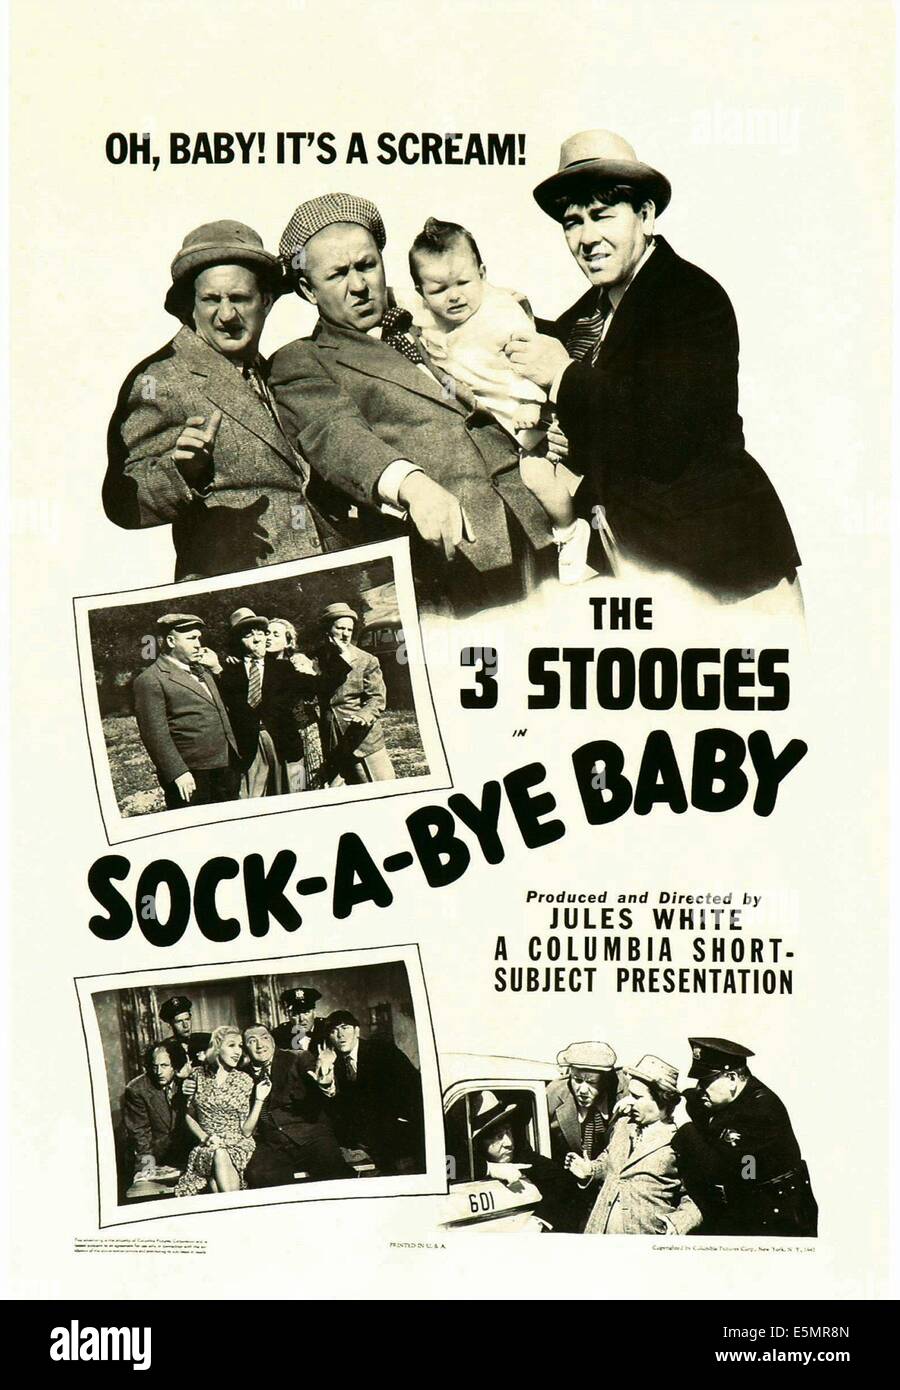 SOCK-A-BYE BABY, The Three Stooges-top from left: Larry Fine, Curly Howard, Moe Howard, 1942. Stock Photo